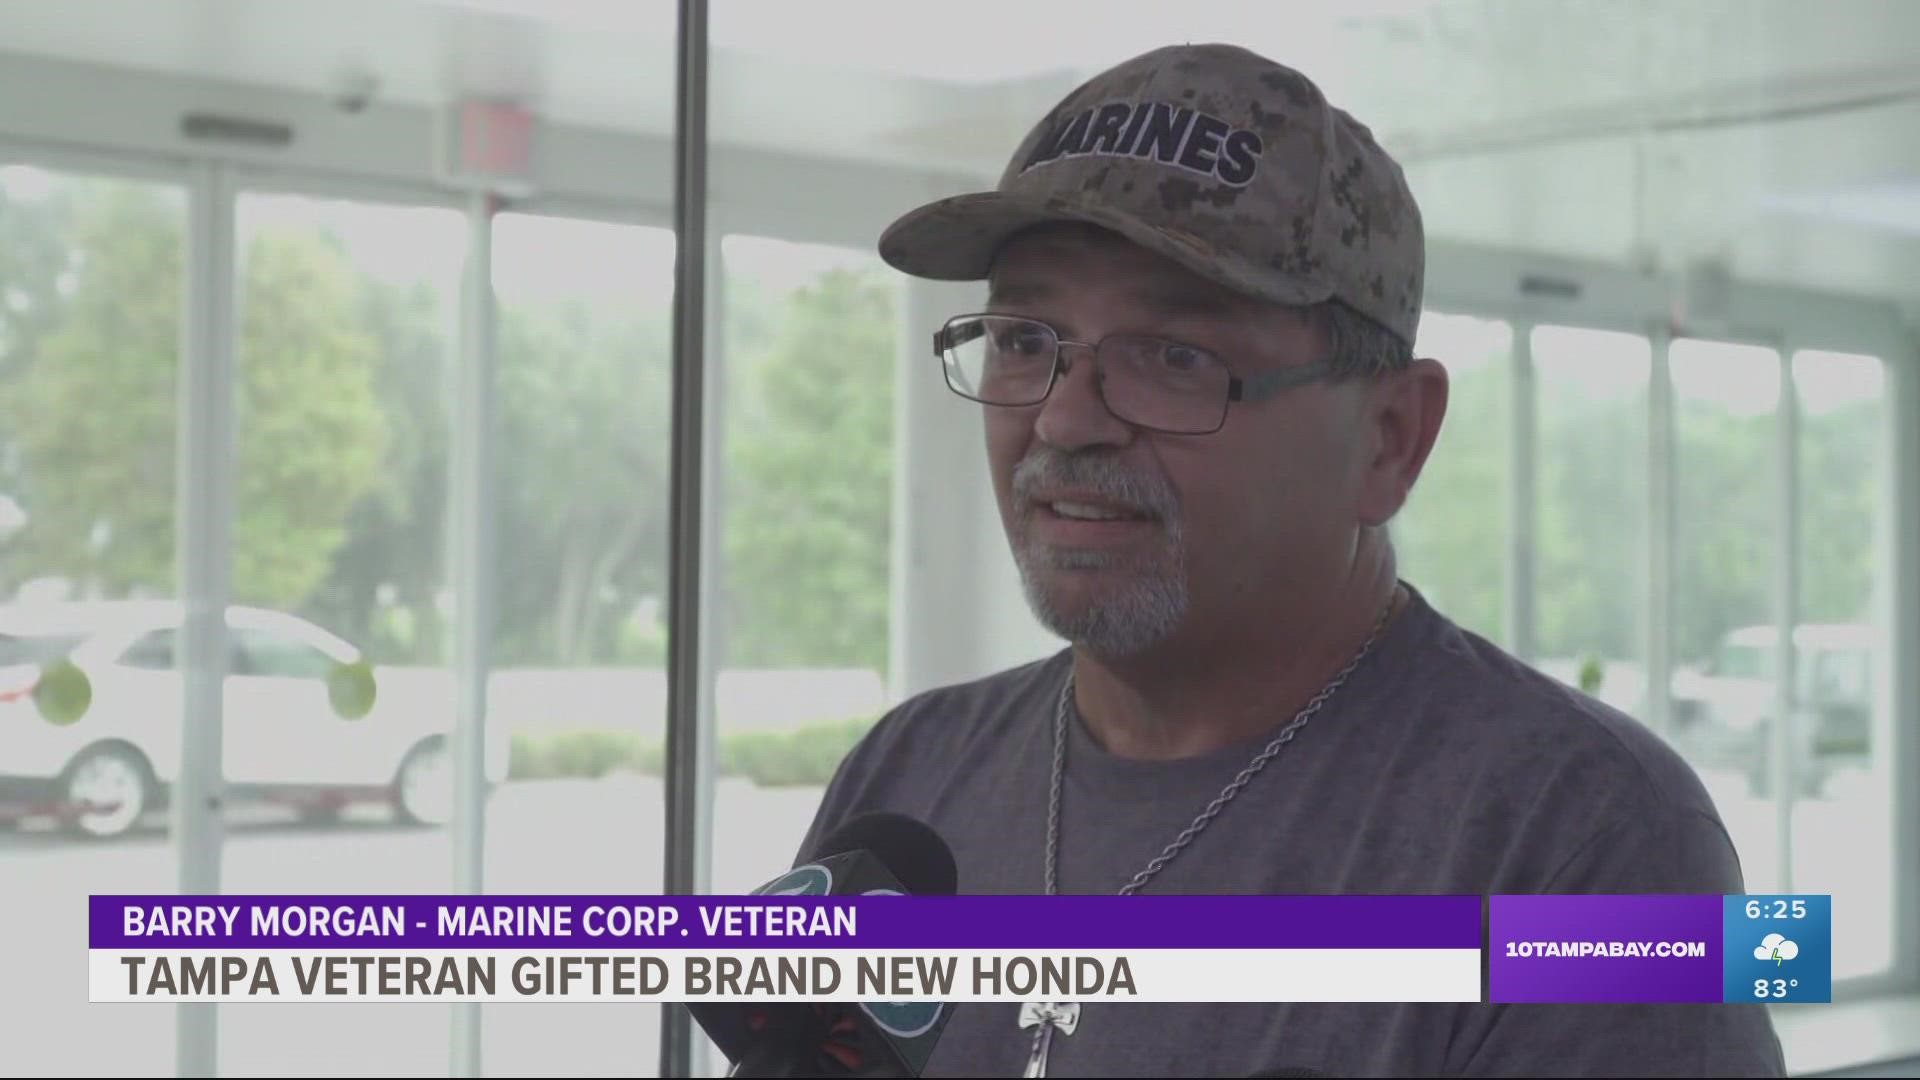 Marine Corp. Veteran Barry Morgan's truck gave out and needed a new engine, which would've cost him thousands.